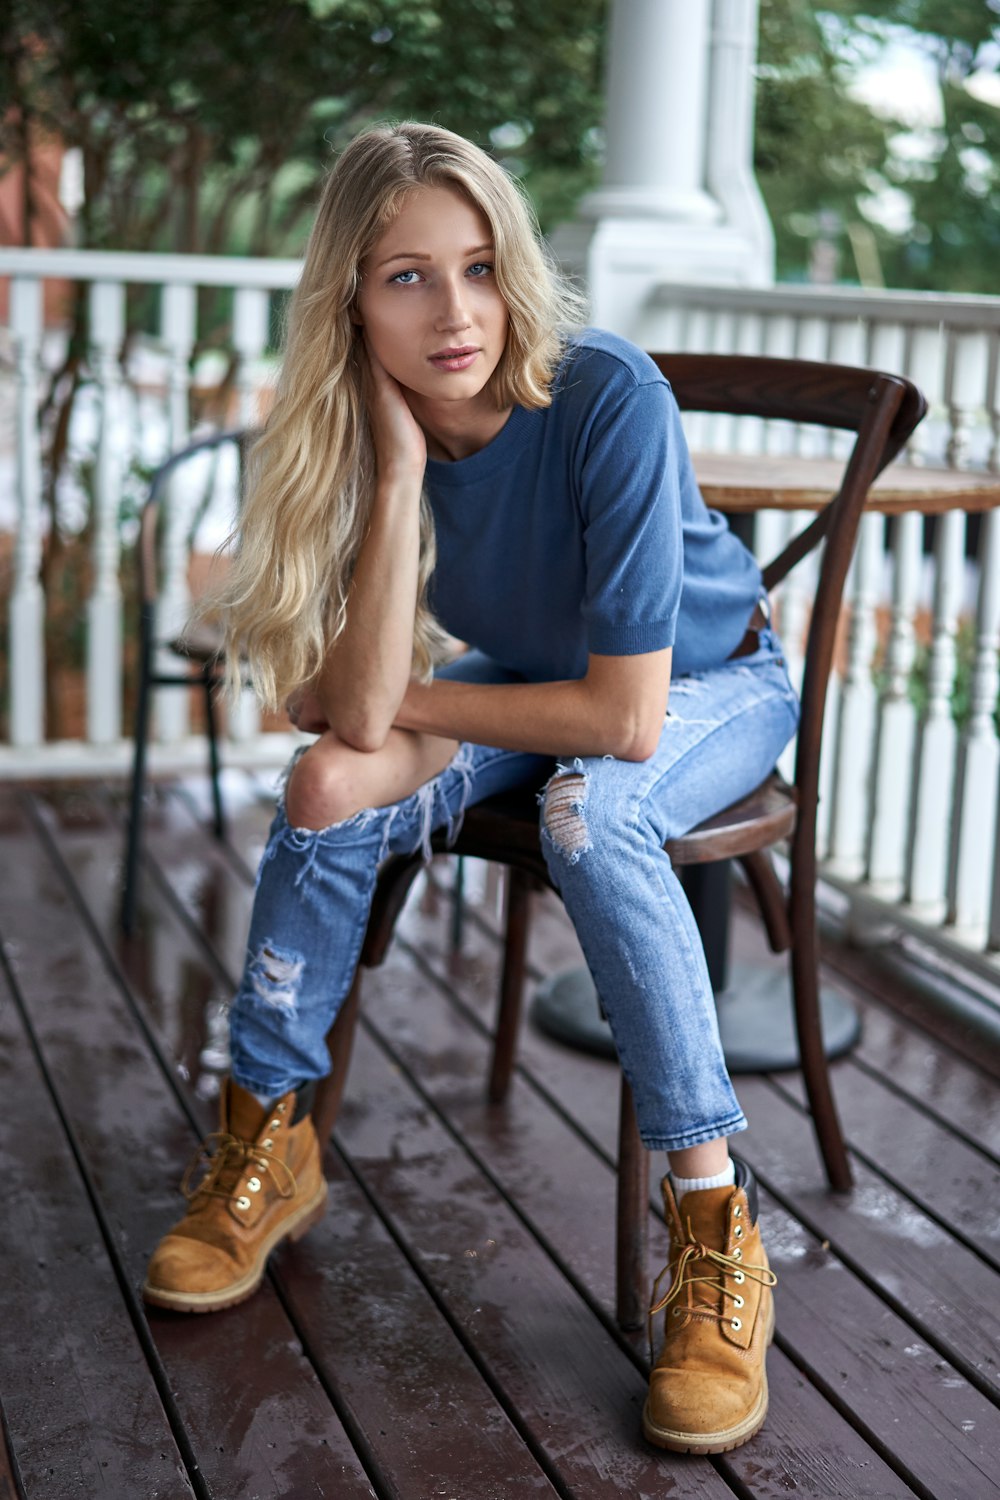 woman in blue long sleeve shirt and blue denim jeans sitting on brown wooden chair